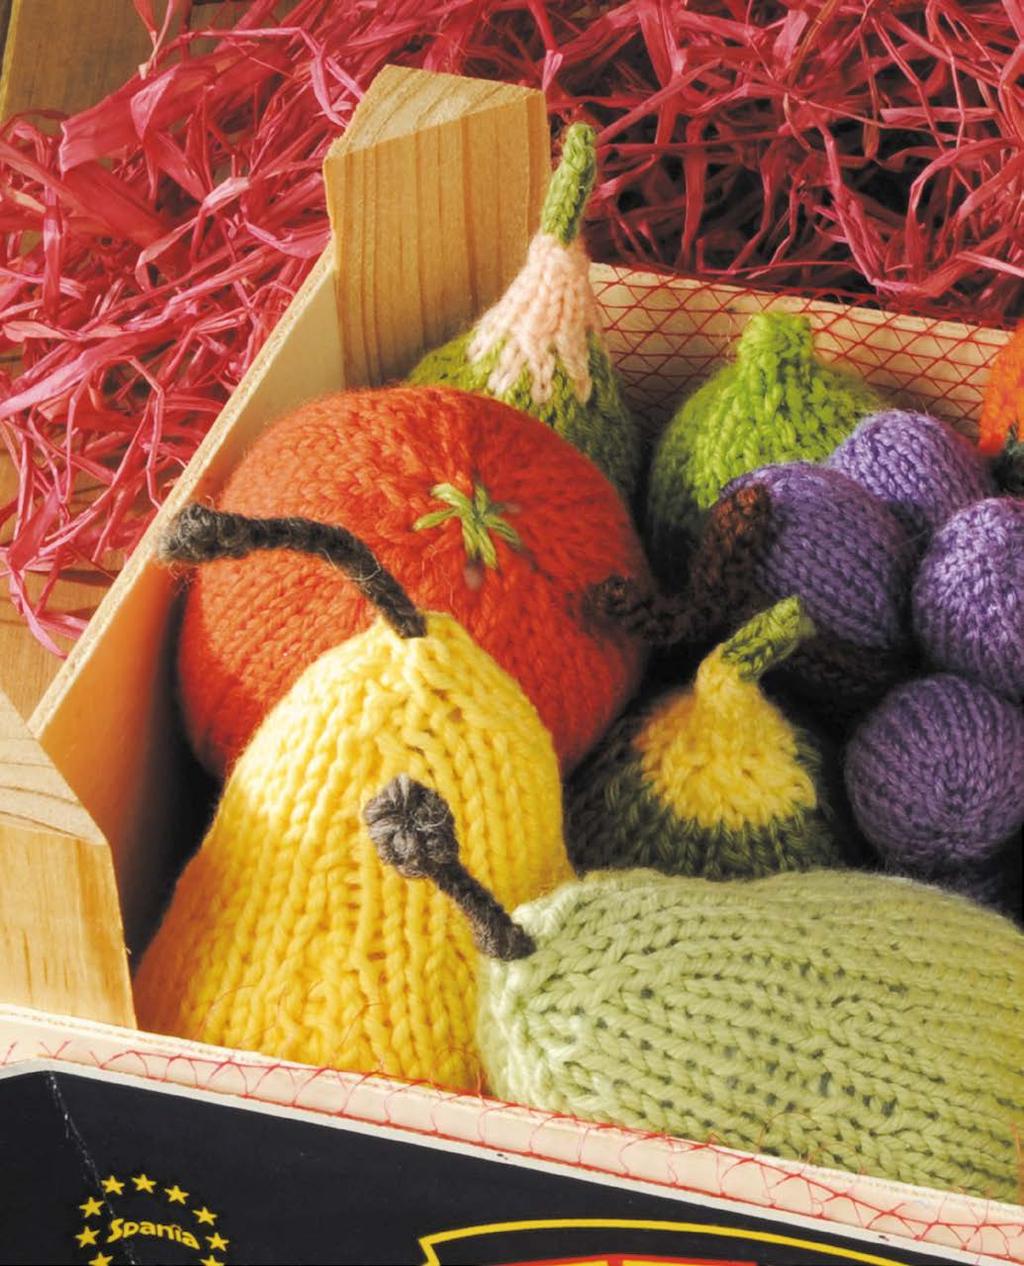 Knitted vegetables Tuesday 30 January Time: 10.